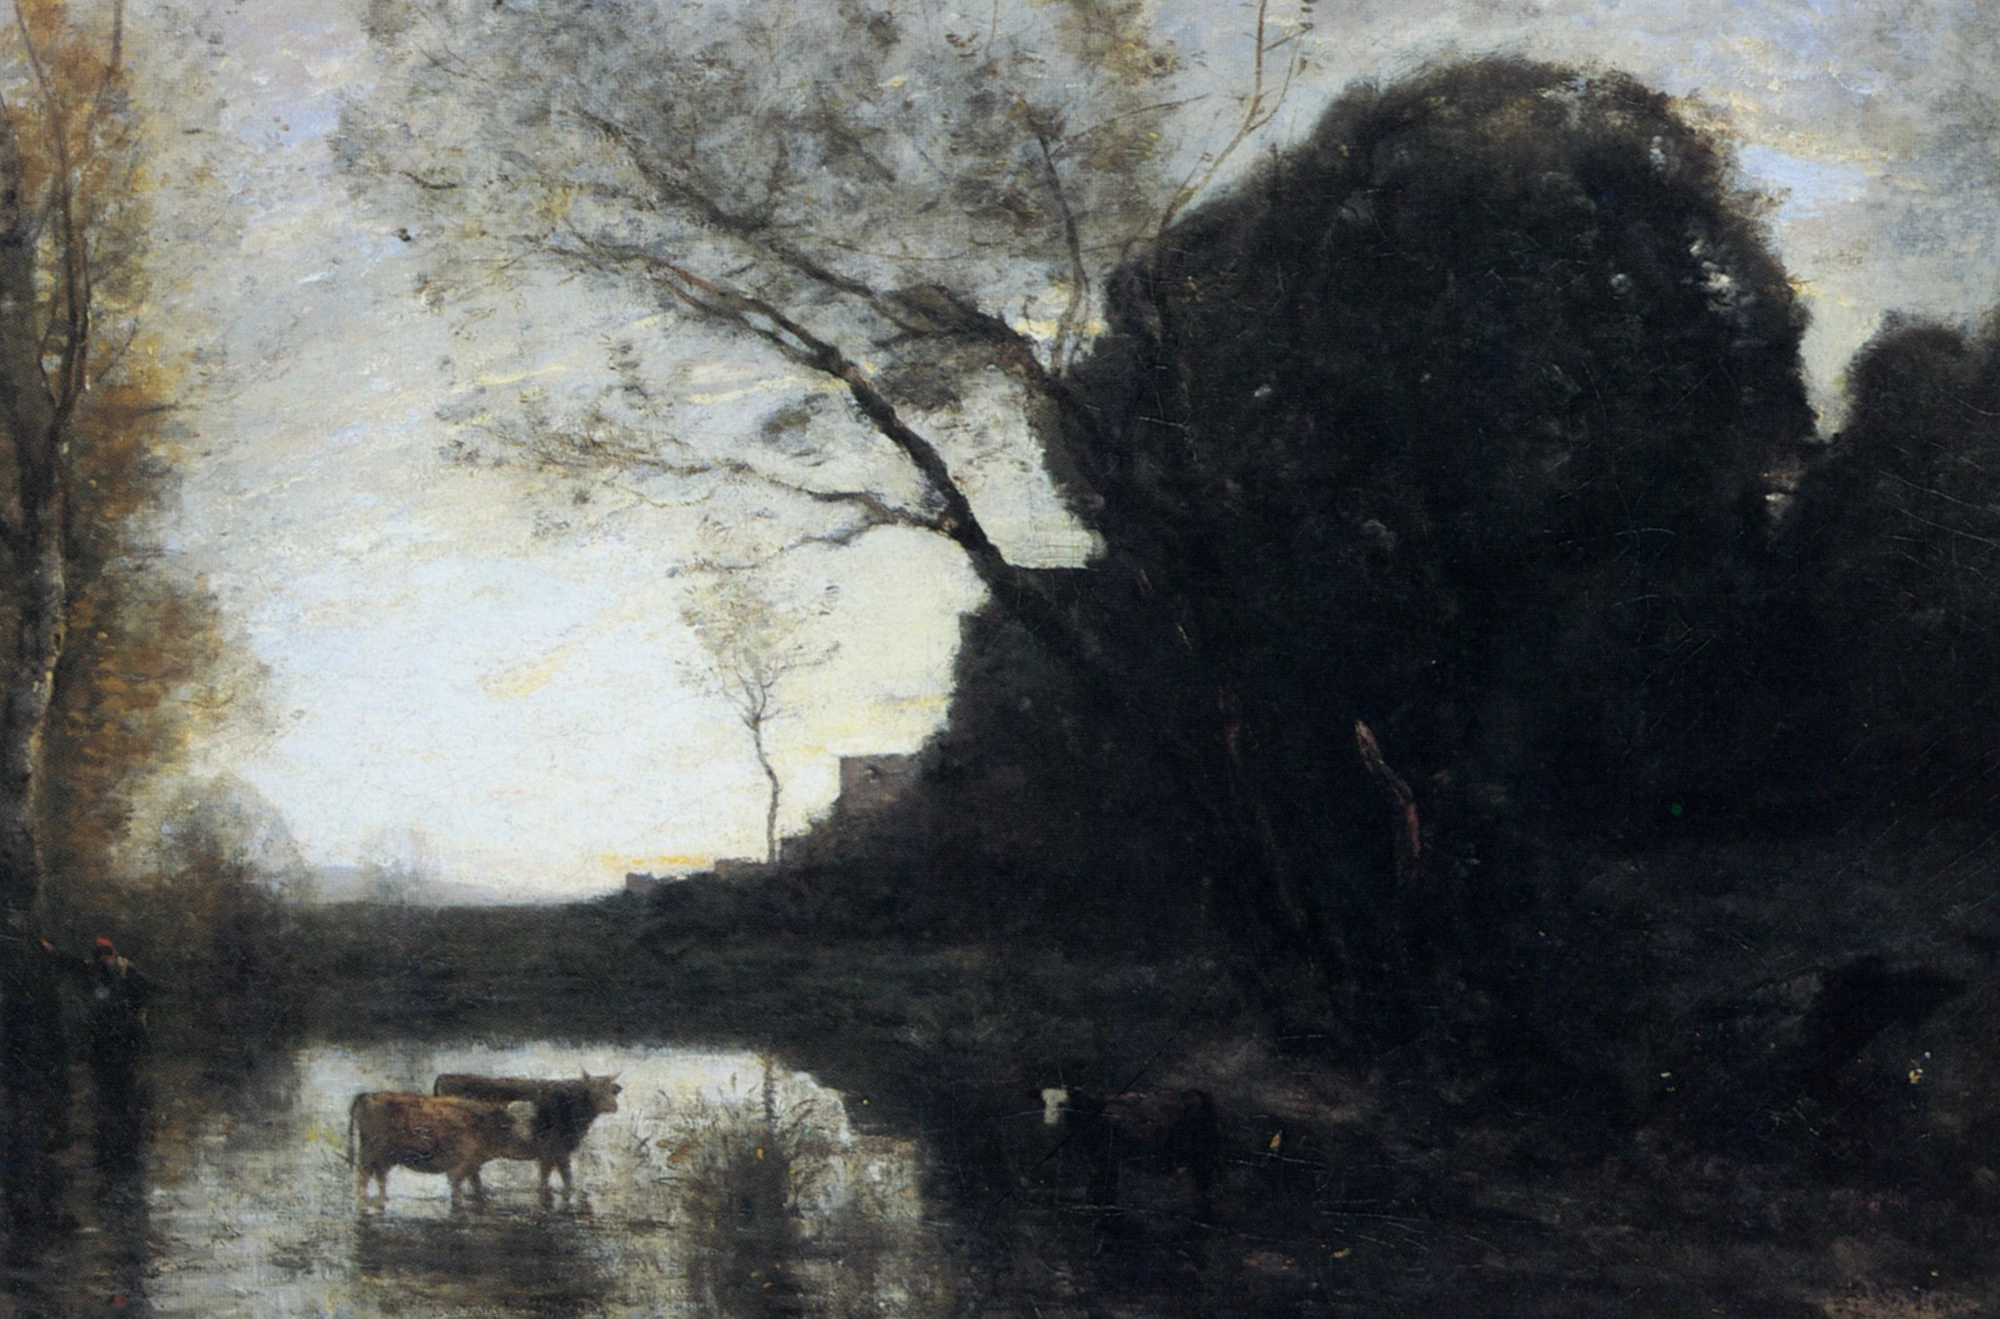 The Ford Under The Bended Tree, Jean-Baptiste Camille Corot